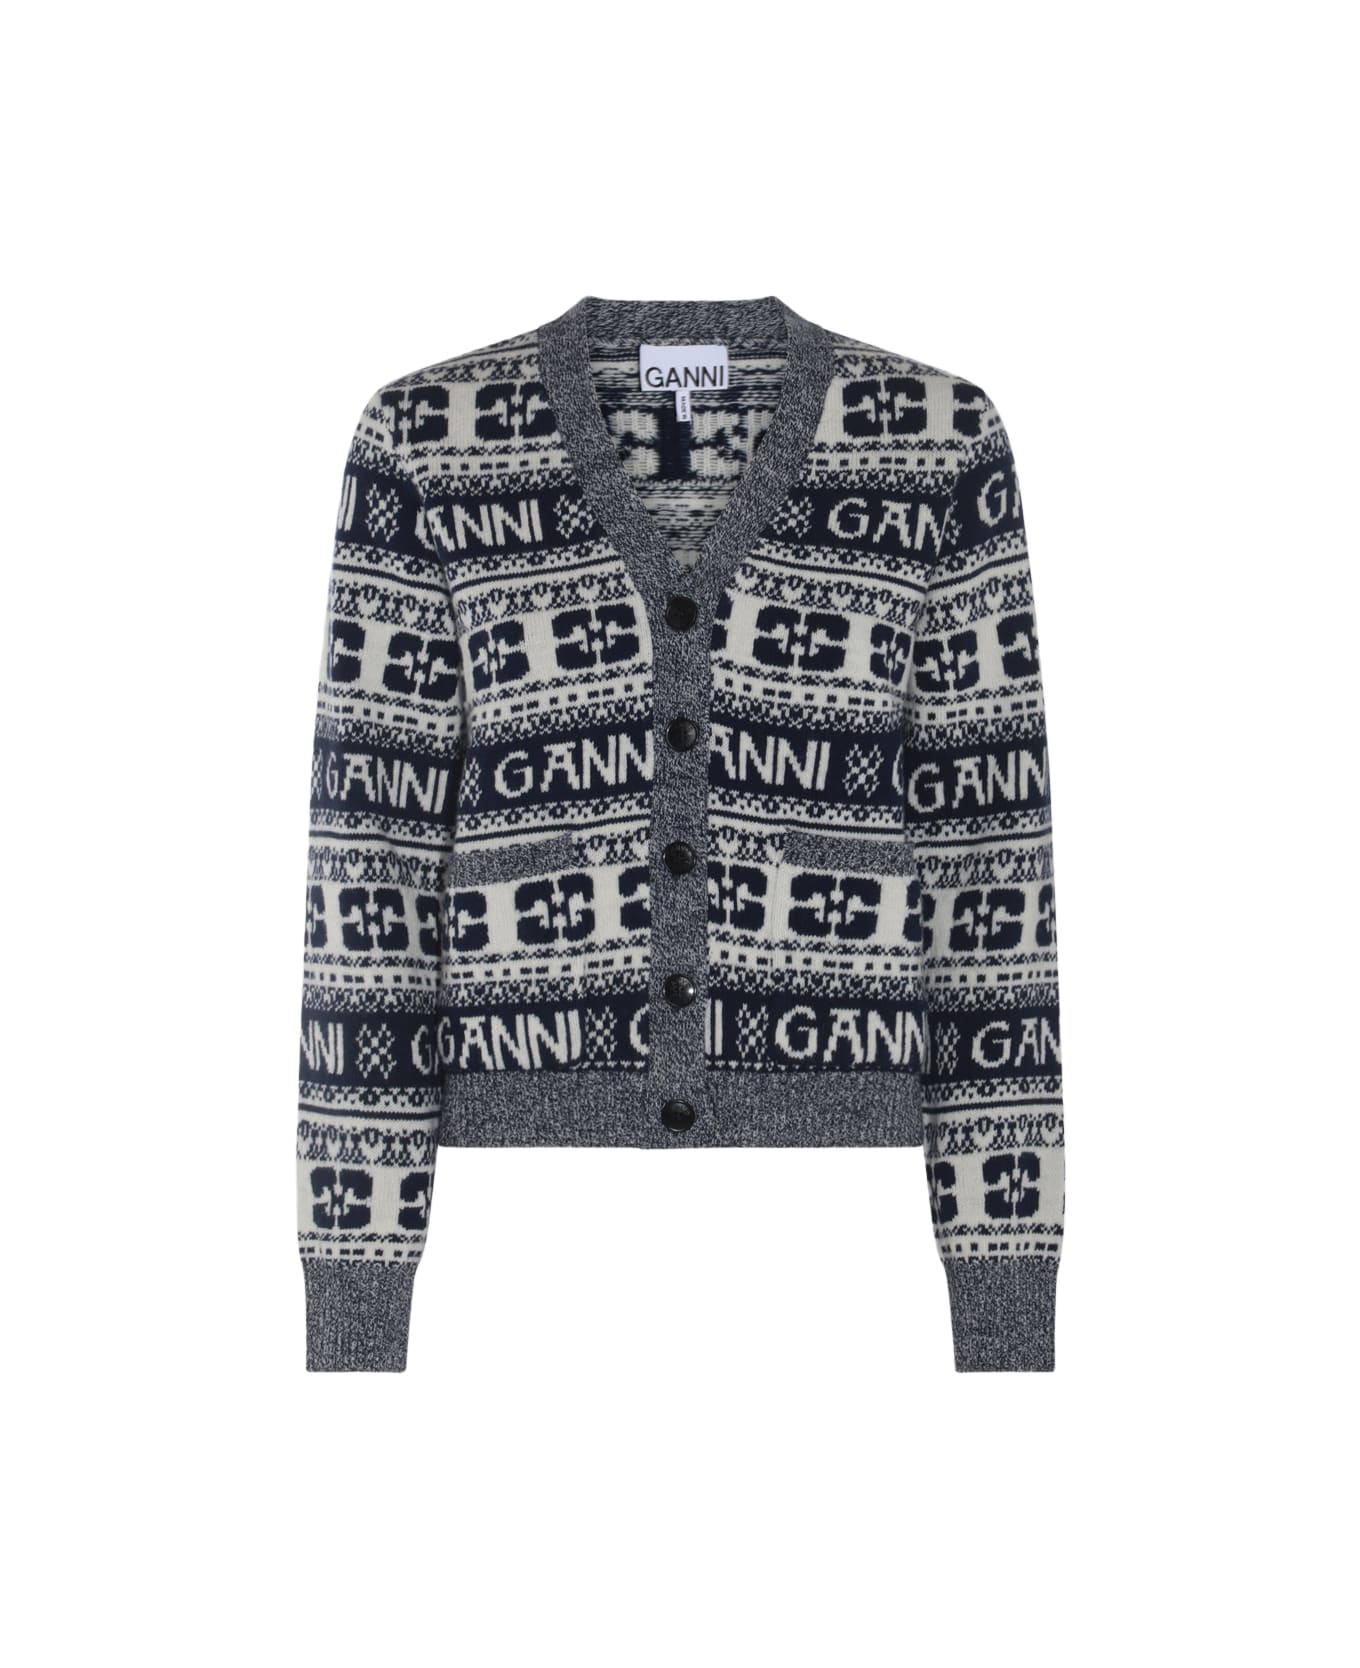 Ganni Navy Blue And White Wool Blend Cardigan - Sky Captain